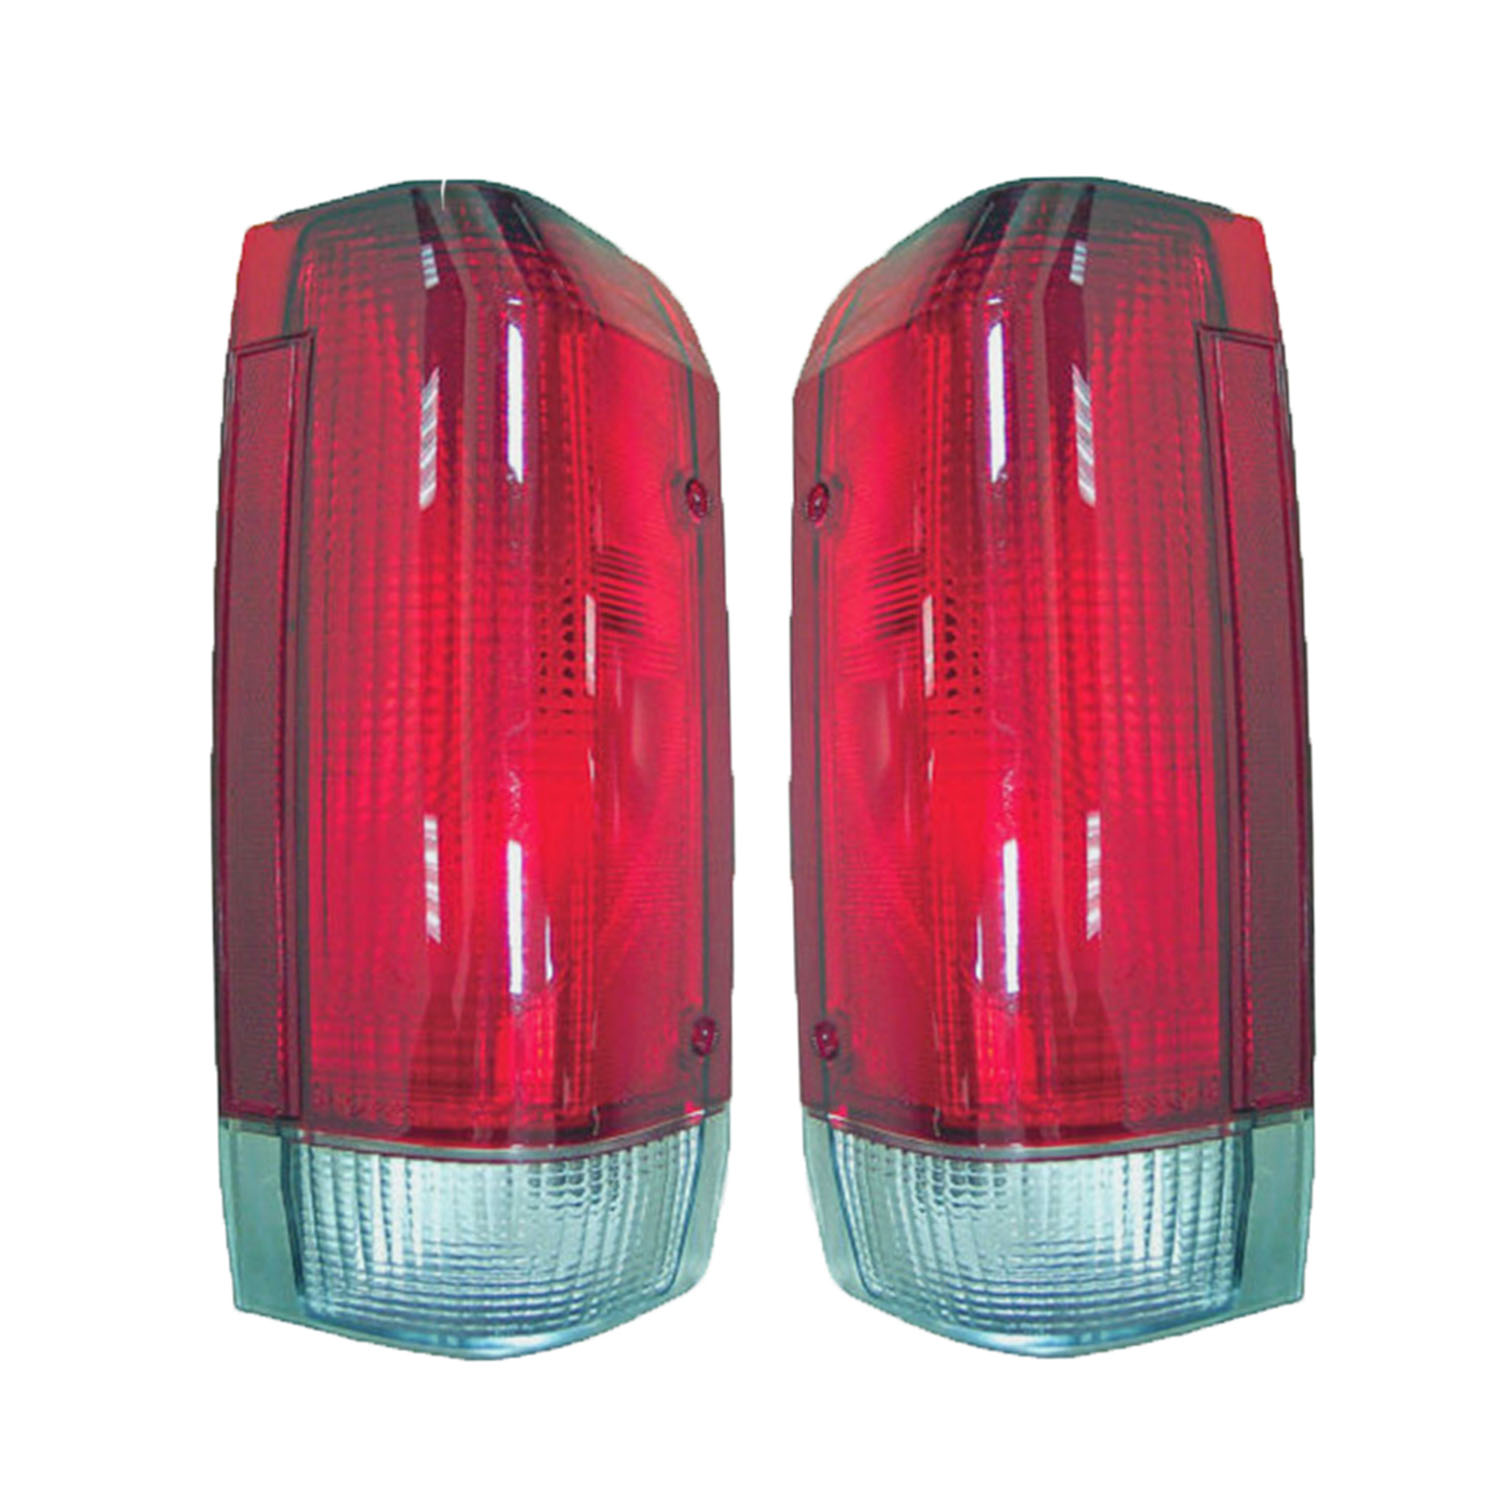 Rareelectrical NEW PAIR OF TAIL LIGHTS COMPATIBLE WITH FORD BRONCO 1987-1989 E7TZ 13405 C E7TZ 13404 C FO2801103 E7TZ13404C E7TZ-13404-C